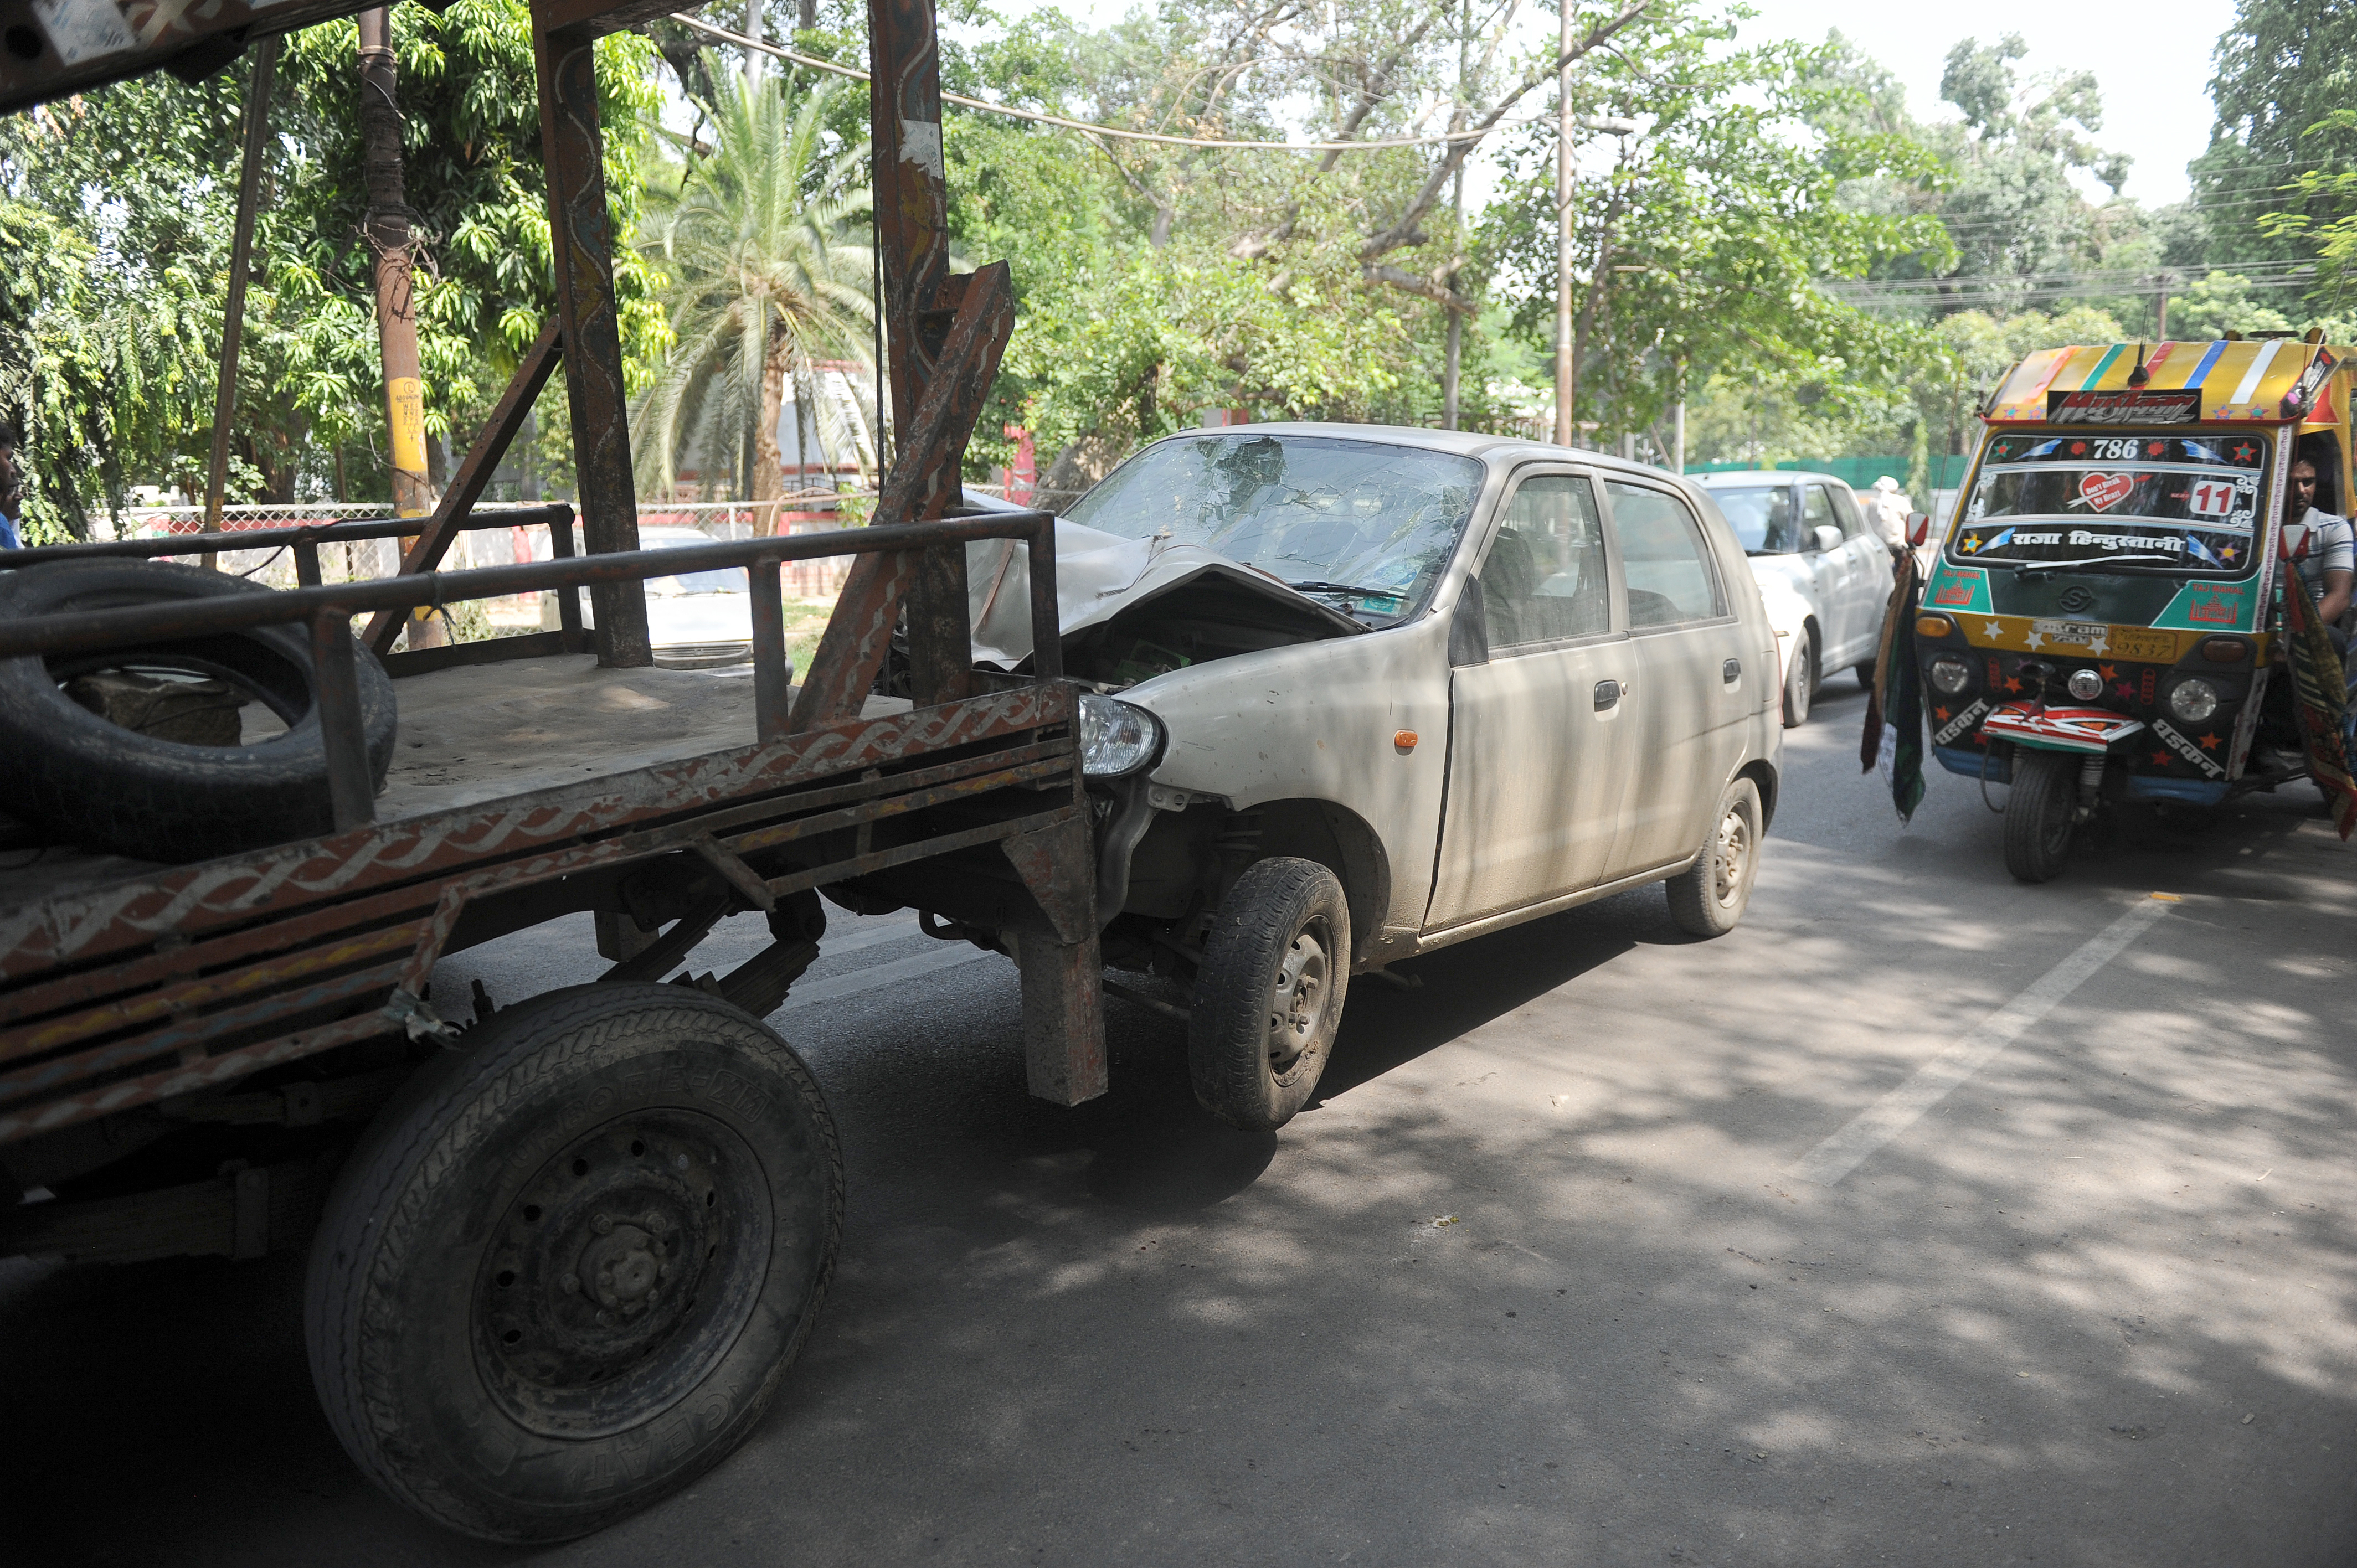 Vehicles seized following road accidents are left outside a police station in the Indian city of Allahabad on June 9, 2016. India's transport ministry admitted June 7 it has so far failed to improve road safety but said it was pushing for stricter laws, as new figures revealed 17 people die in traffic accidents every hour. Transport minister Nitin Gadkari acknowledged an urgent need to improve road infrastructure as the numbers showed traffic accidents were one of the single biggest causes of death in India.  / AFP PHOTO / SANJAY KANOJIA